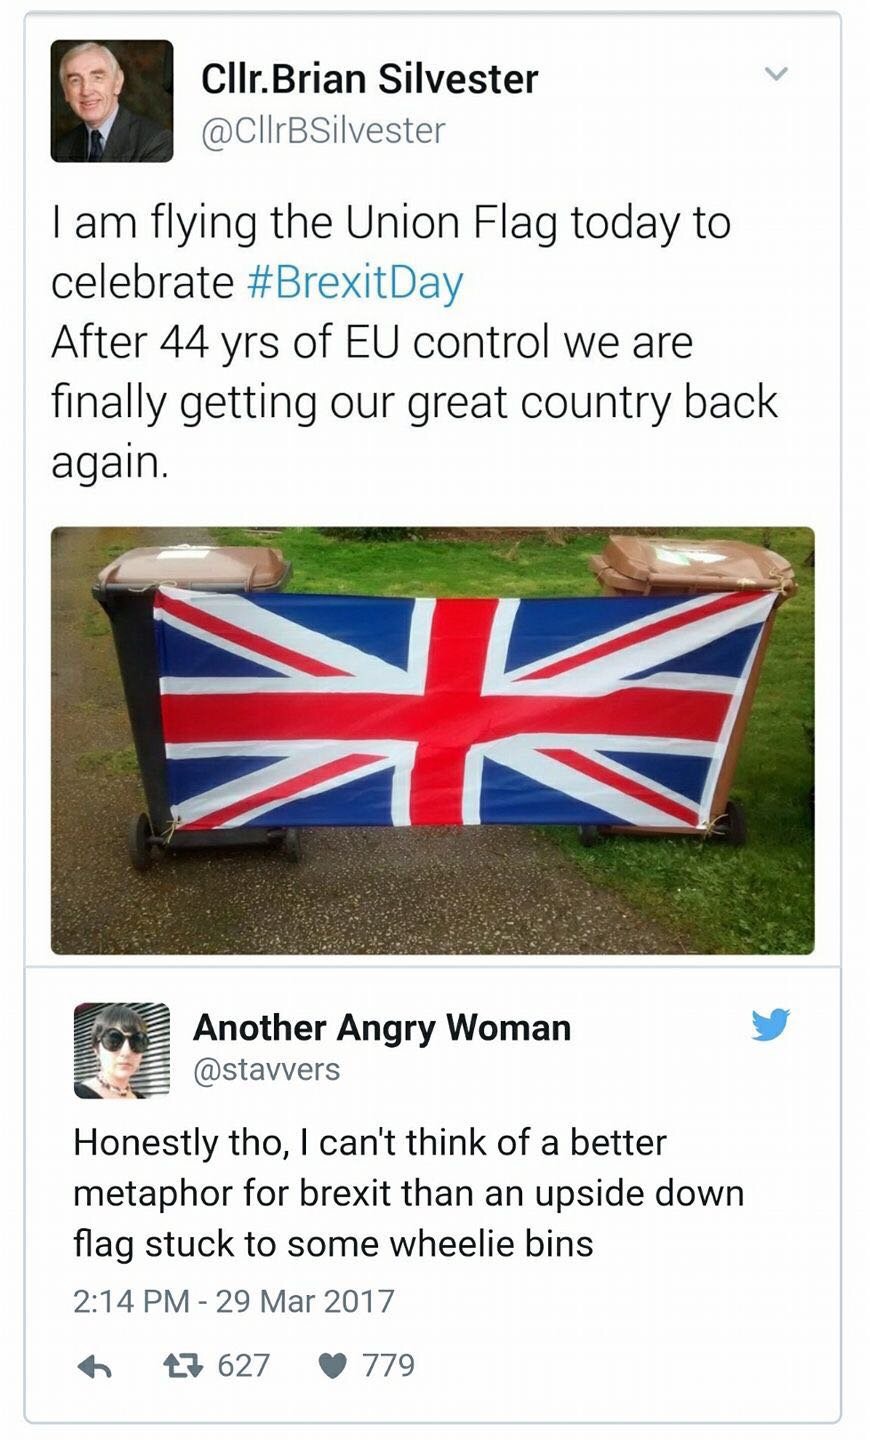 brexiteers have flag upside down - Cllr.Brian Silvester I am flying the Union Flag today to celebrate After 44 yrs of Eu control we are finally getting our great country back again. Another Angry Woman Honestly tho, I can't think of a better metaphor for 